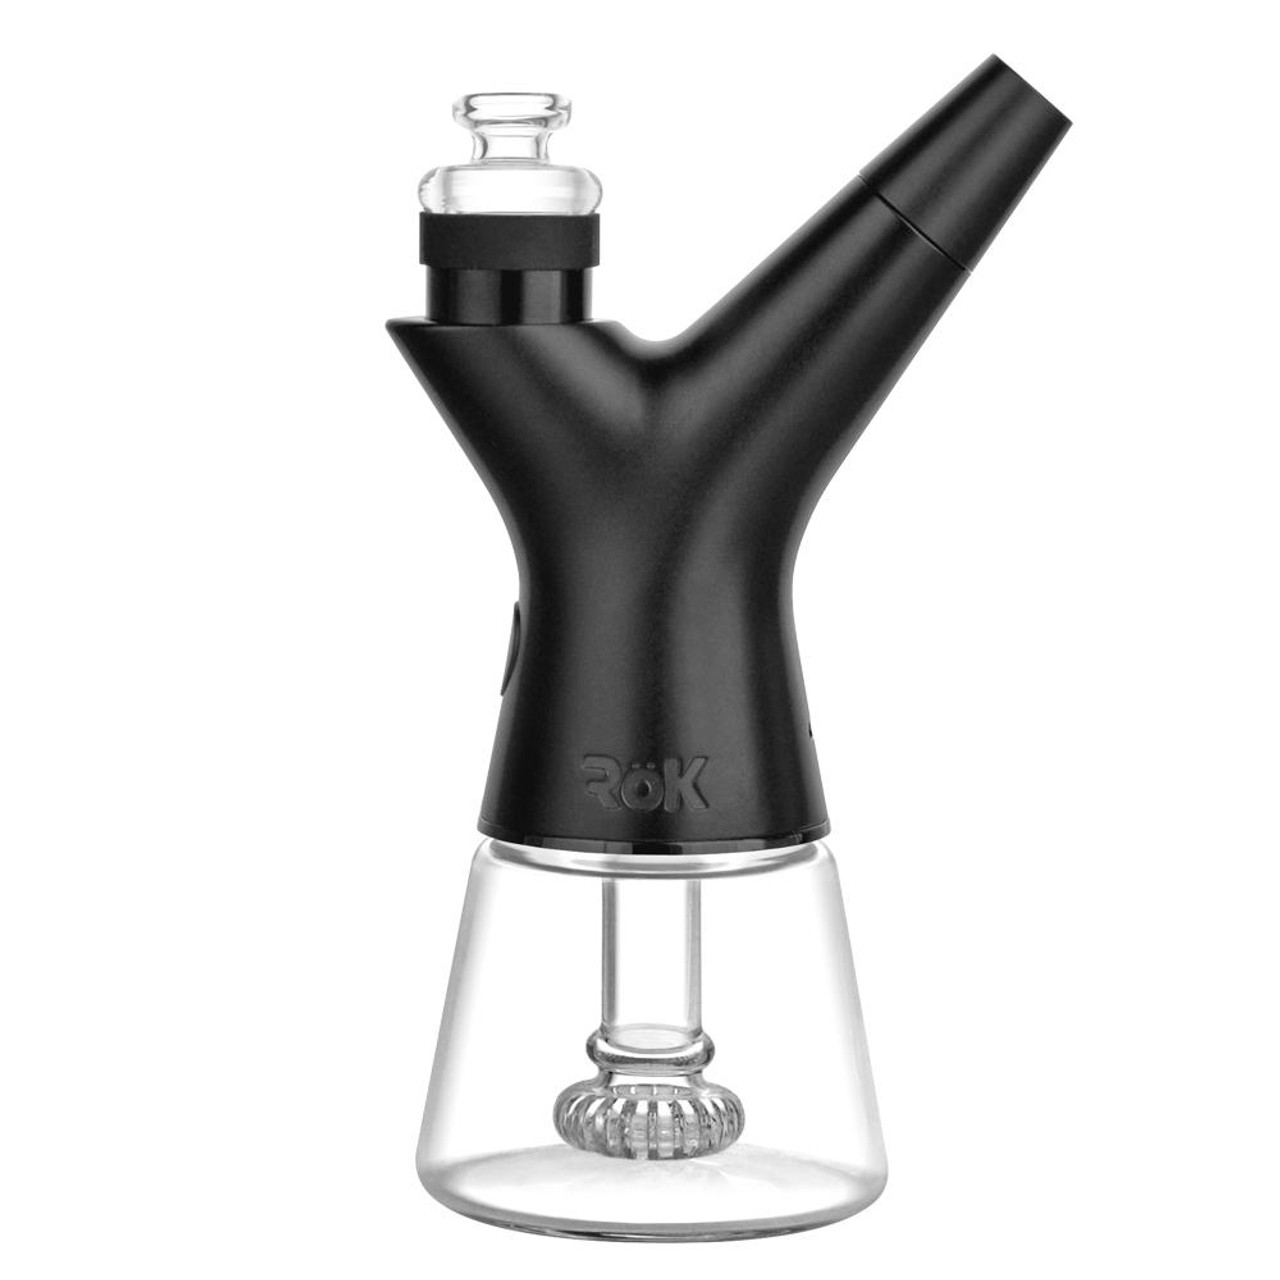 Pulsar Sipper: Electric Dab Rig with Gravity Bong Technology